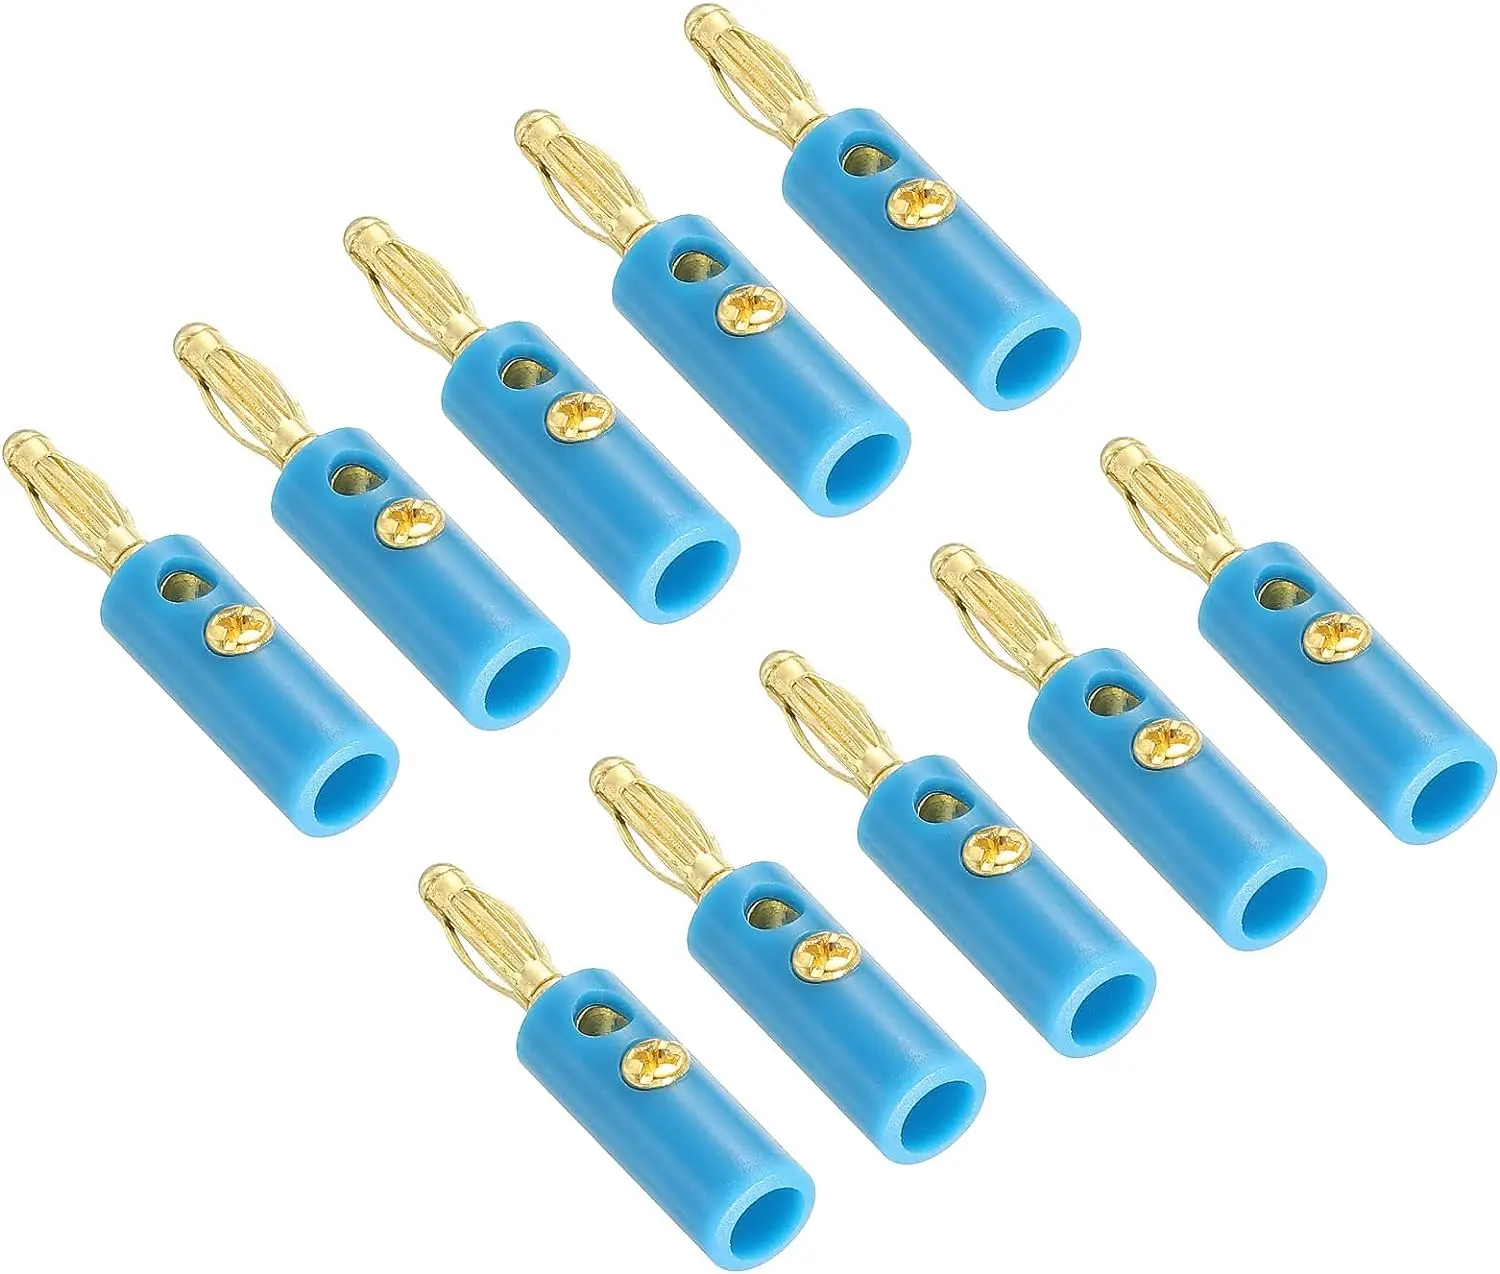 

10 Pack Banana Plugs Connector Screw Type Speaker Banana Plugs 4mm Gold-Plated Alloy Blue for Speaker Wires